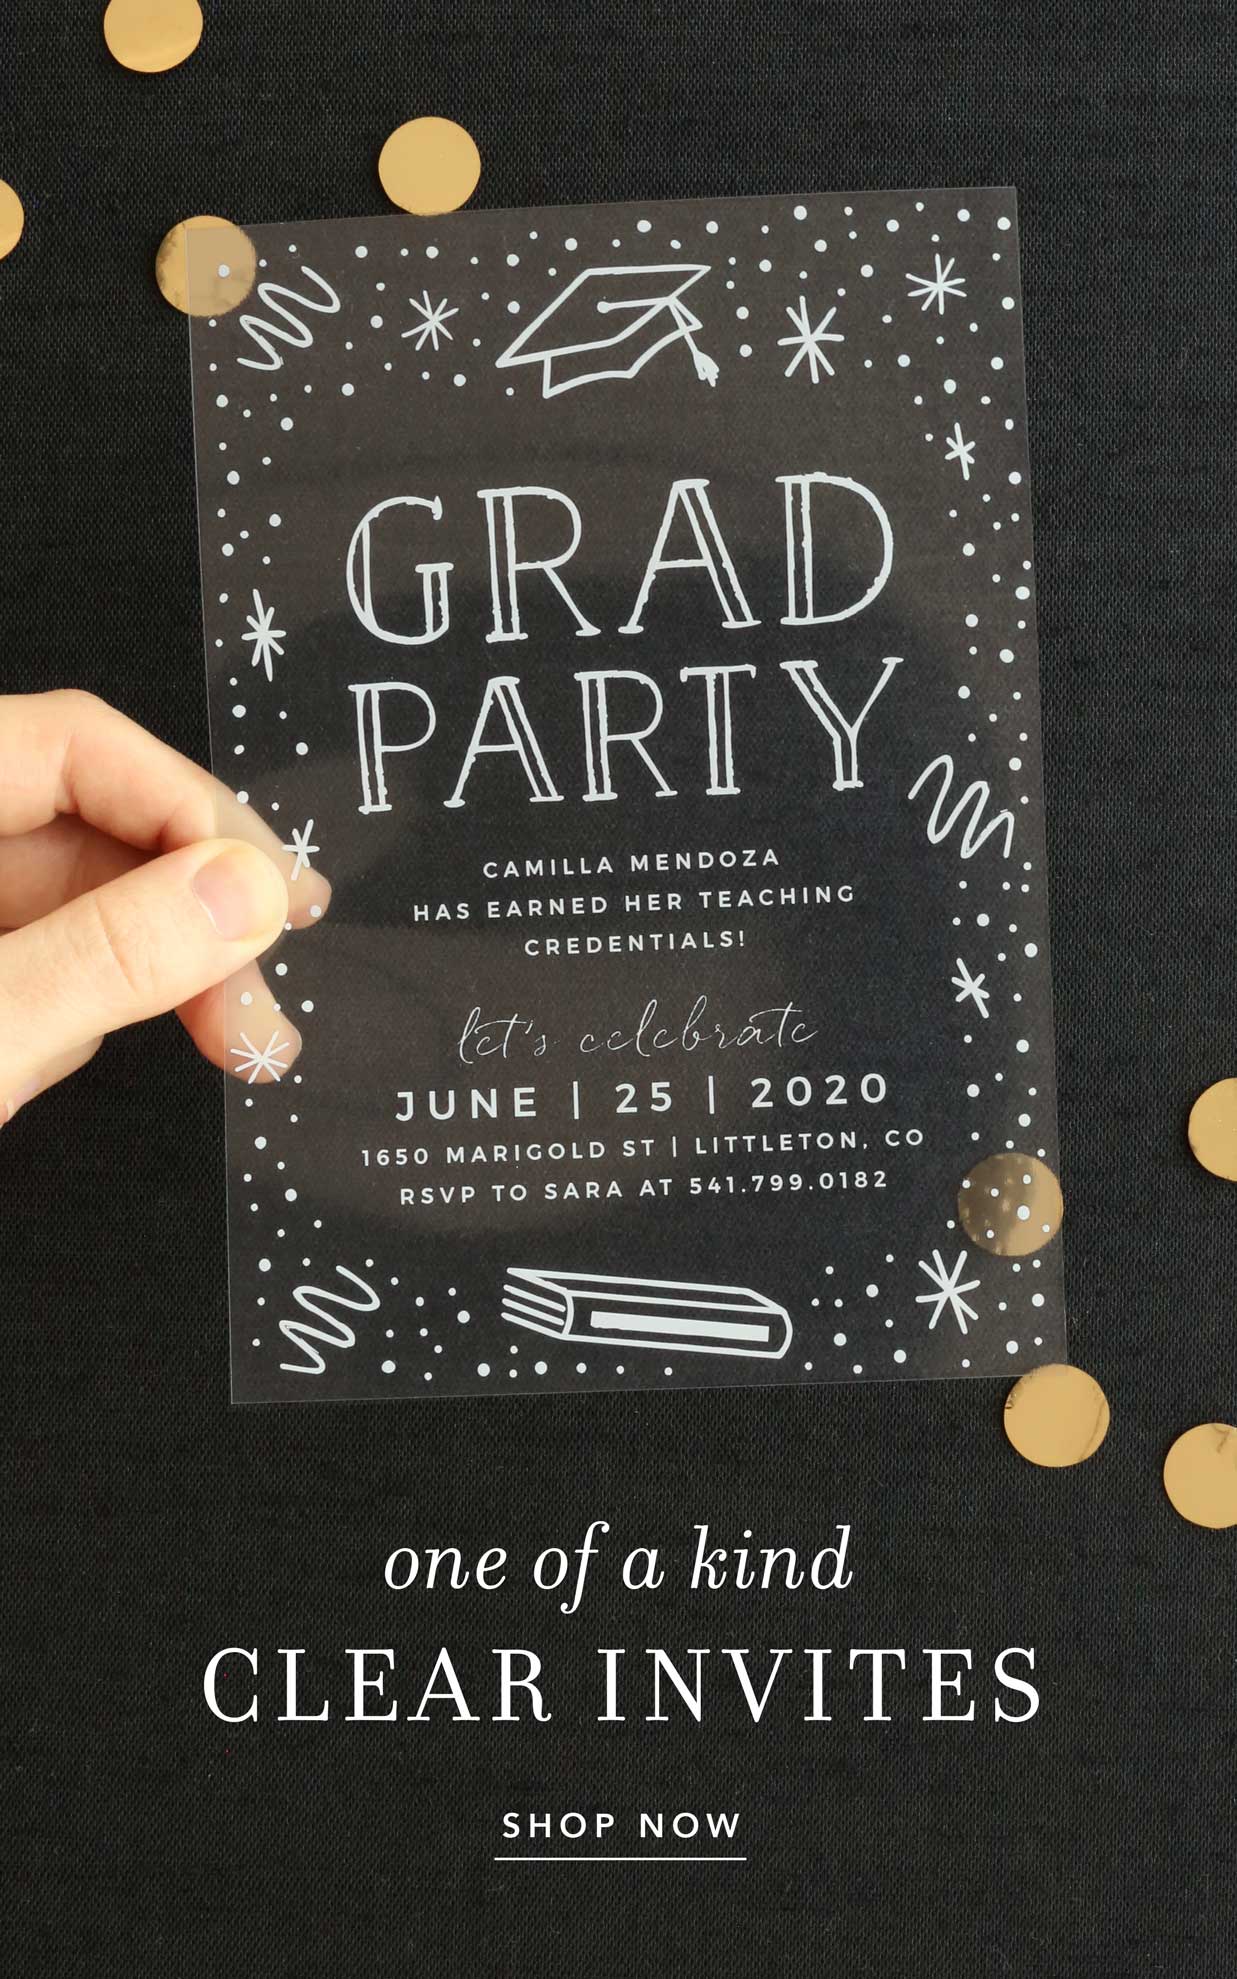 One of a kind clear invites!